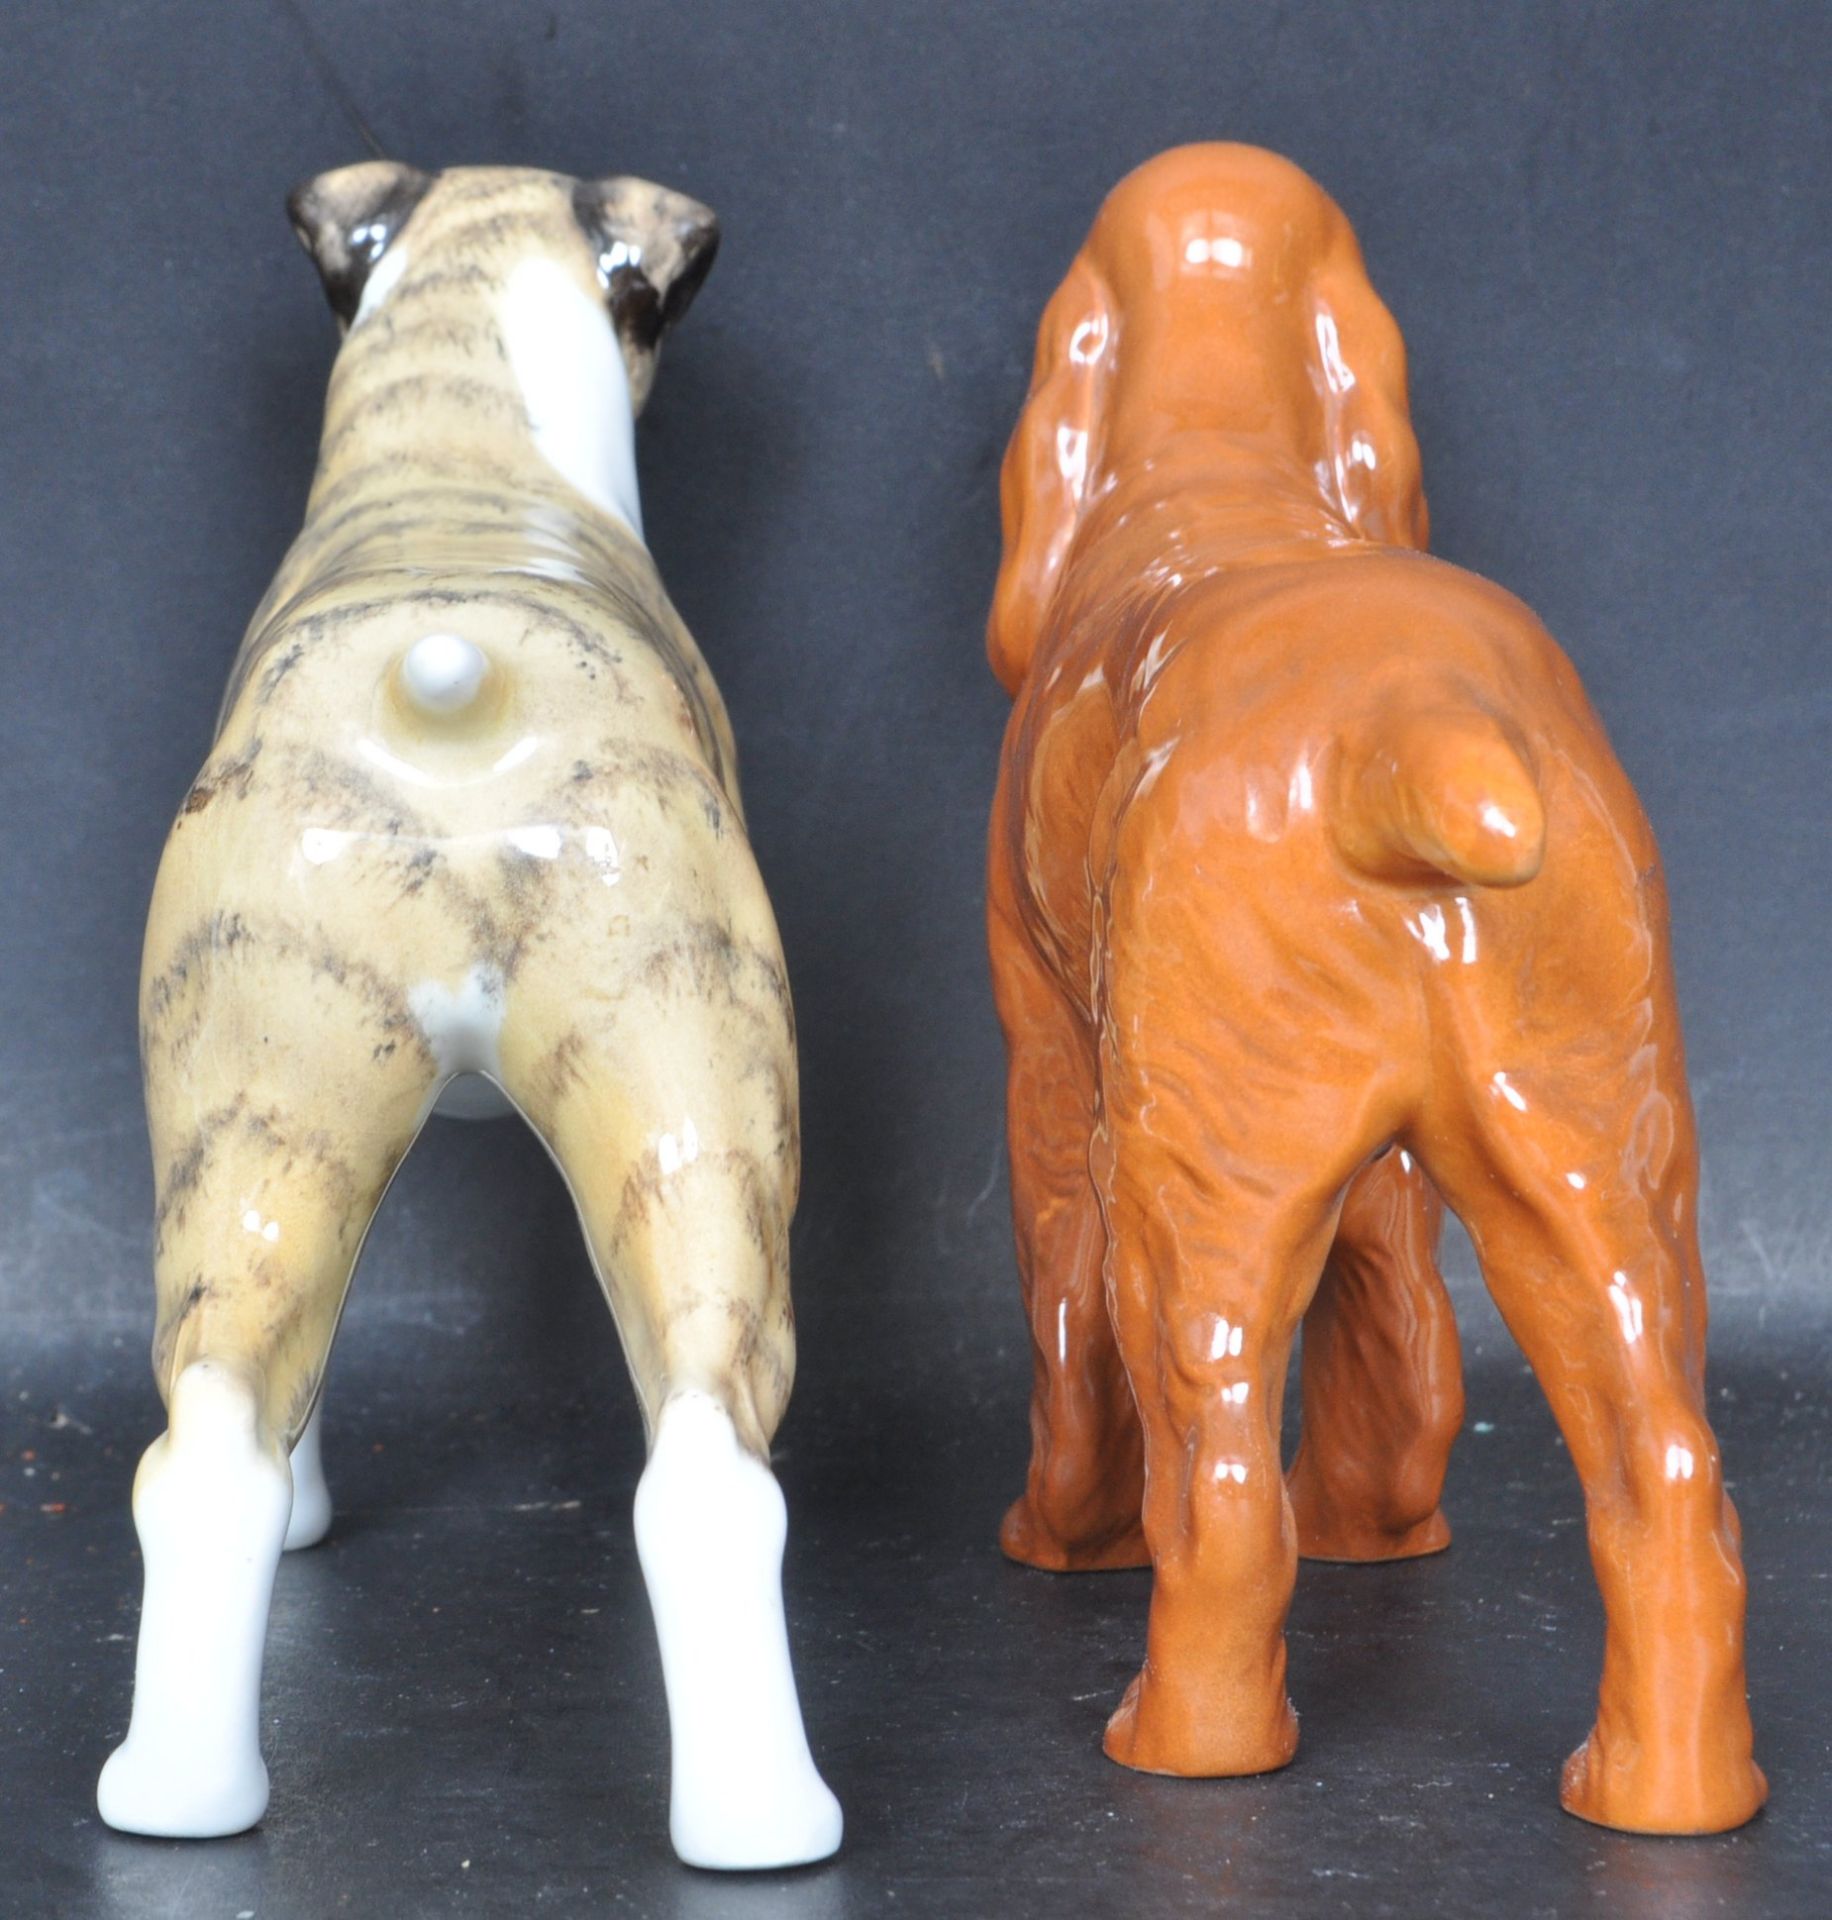 GROUP OF TWO CERAMIC PORCELAIN DOG FIGURINES BY BESWICK - Image 4 of 8